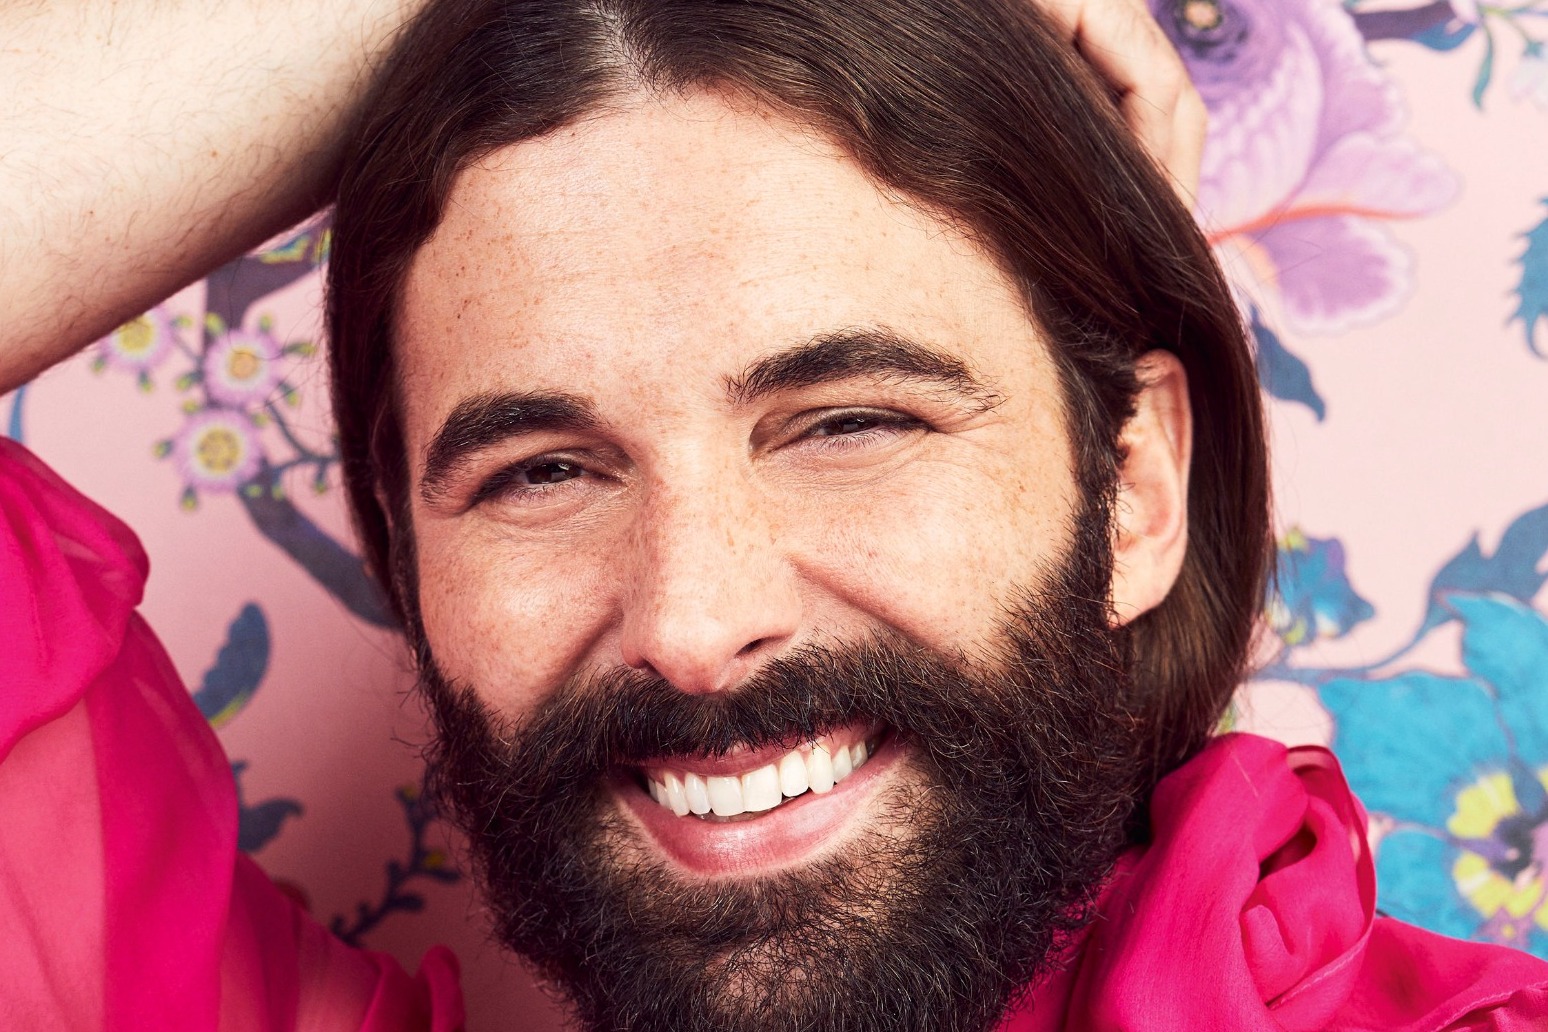 QUEER EYE STAR OPENS UP ABOUT LIVING WITH HIV 